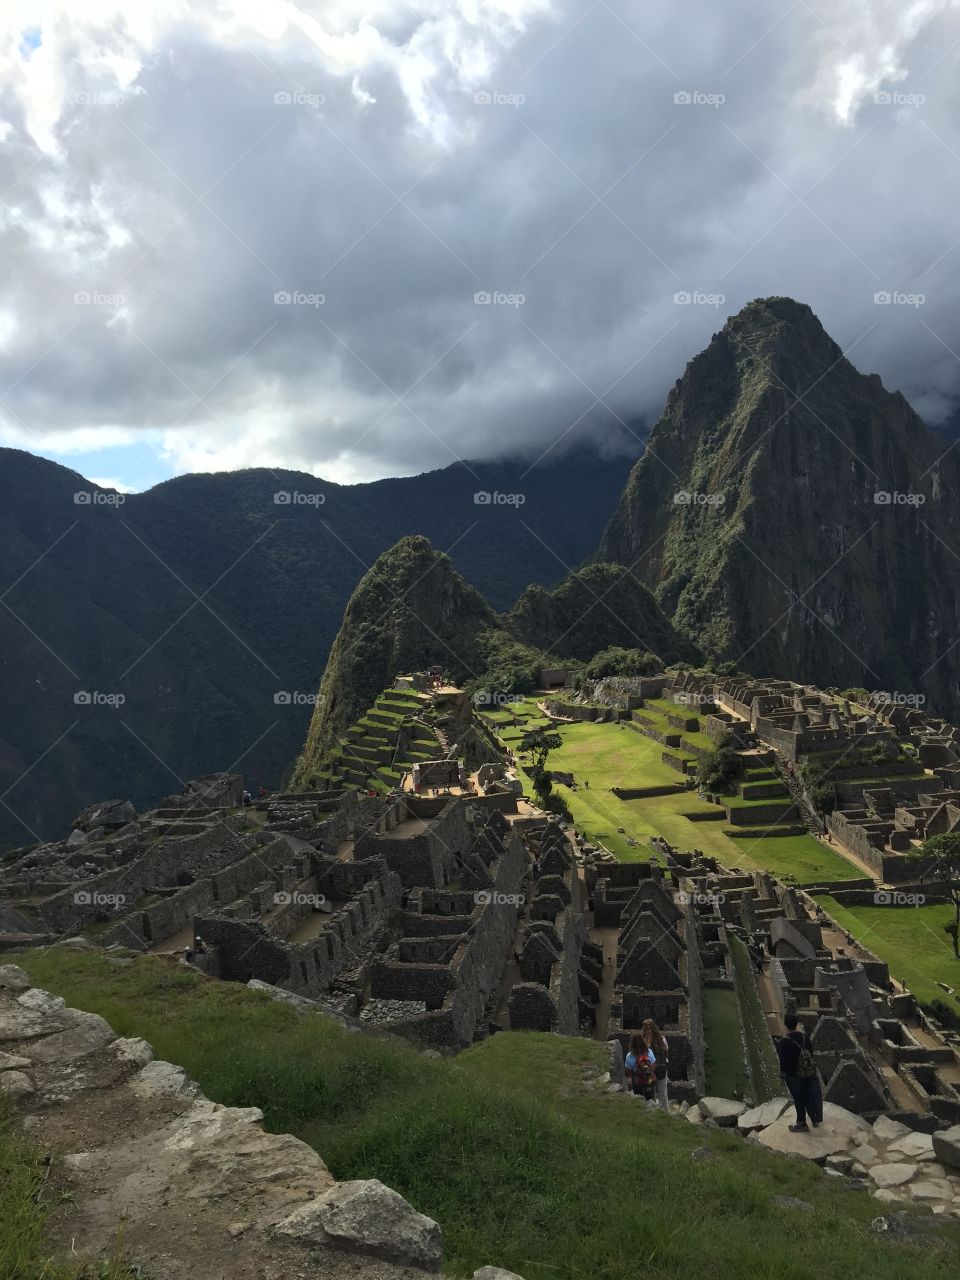 Choice lighting . The sun shines selectively on the beautiful hilltop city of Machu Picchu